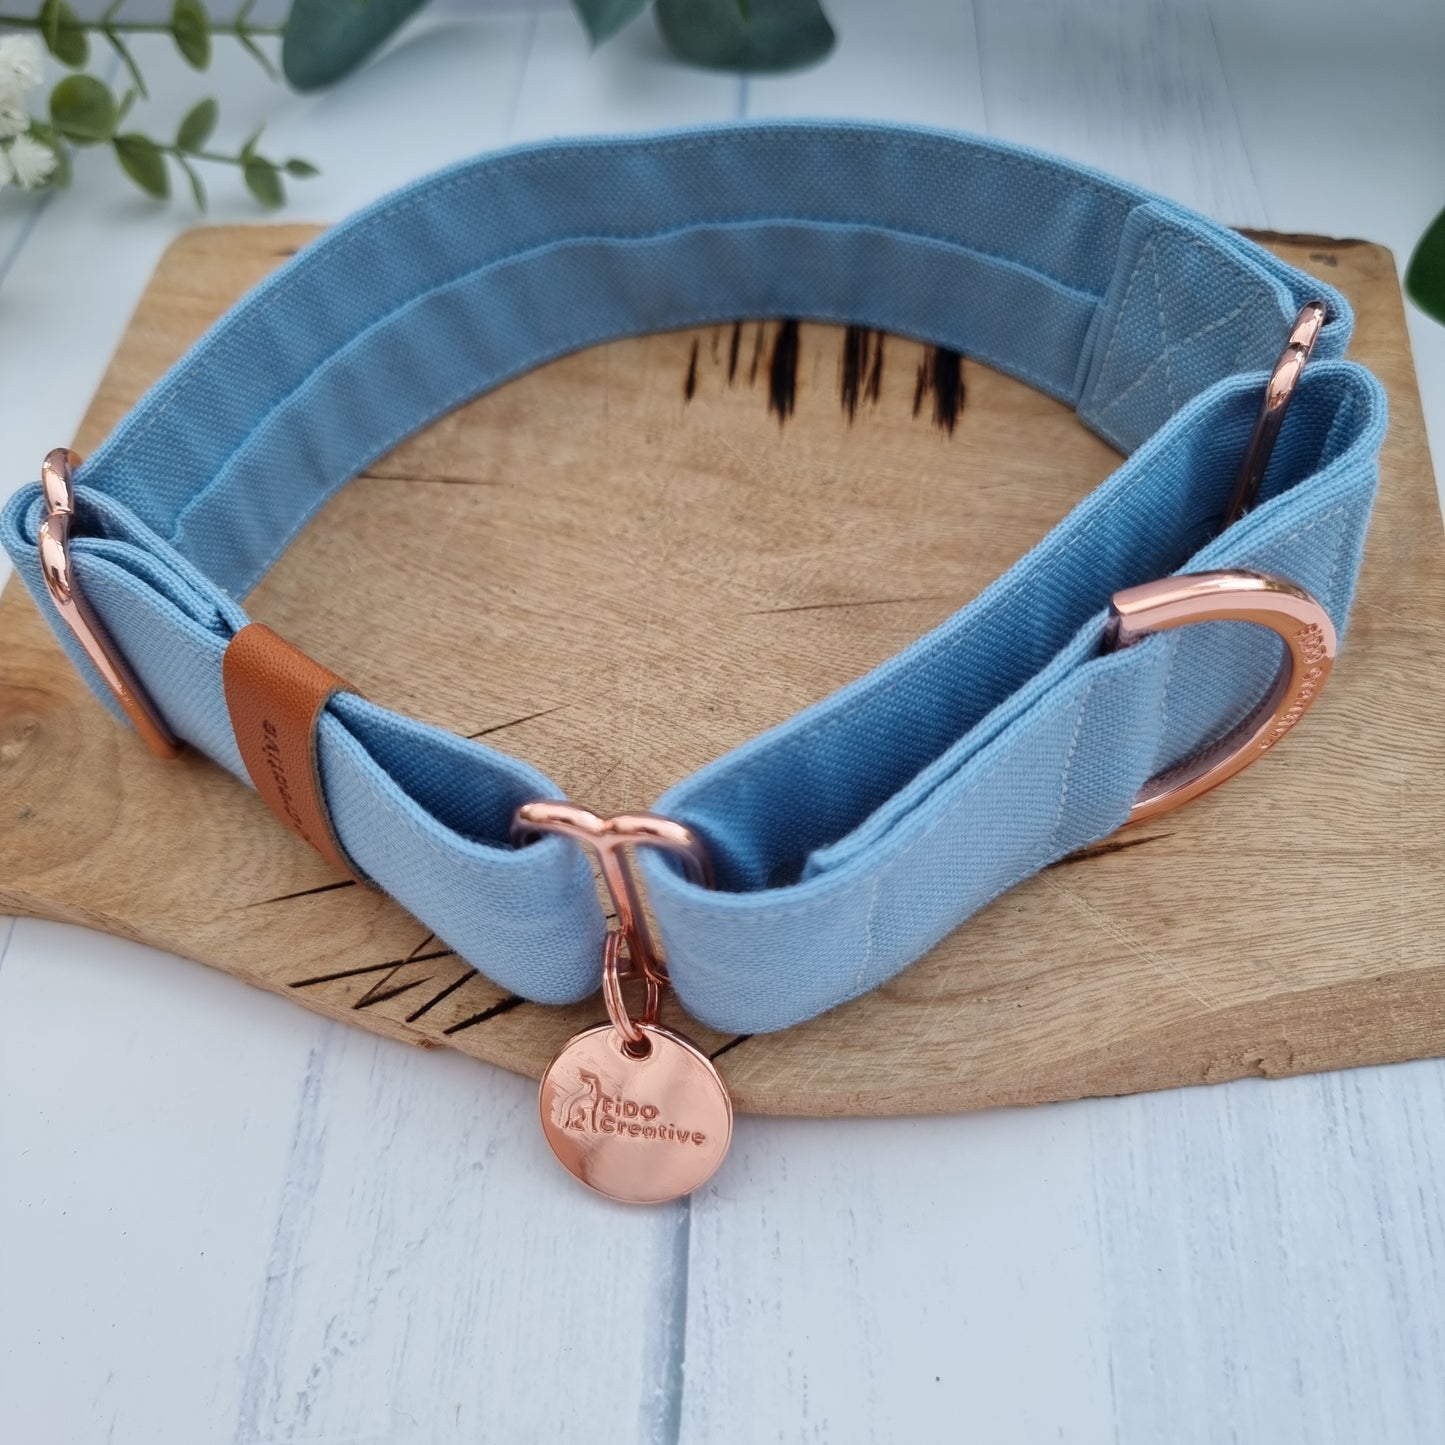 Sky blue martingale collar - Water resistant